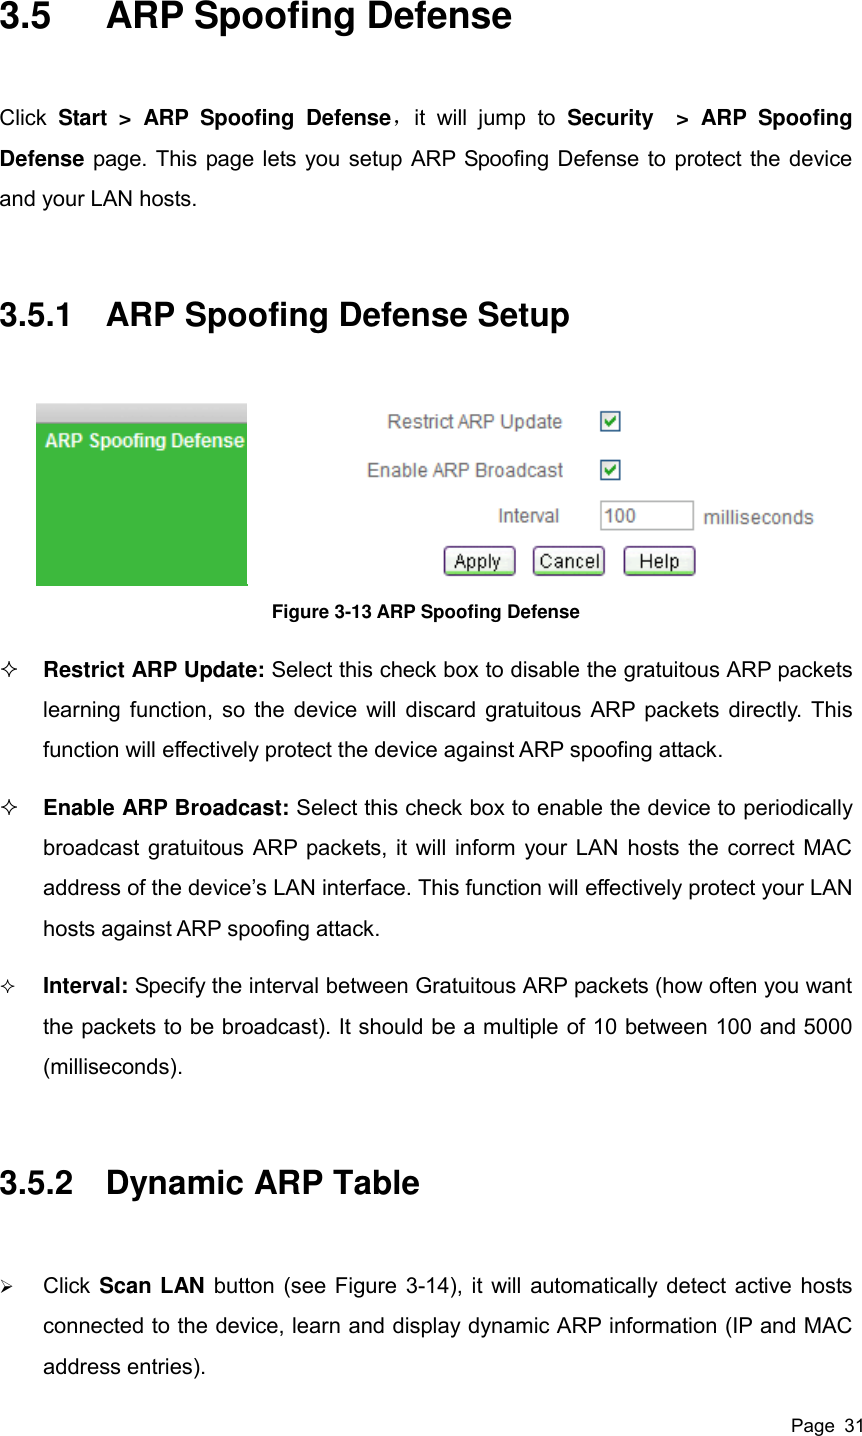  Page  31 3.5  ARP Spoofing Defense Click  Start  &gt;  ARP  Spoofing  Defense，it  will  jump  to  Security  &gt;  ARP  Spoofing Defense page. This page lets you setup ARP Spoofing Defense to protect the device and your LAN hosts. 3.5.1  ARP Spoofing Defense Setup  Figure 3-13 ARP Spoofing Defense  Restrict ARP Update: Select this check box to disable the gratuitous ARP packets learning function, so the device will discard gratuitous ARP packets directly. This function will effectively protect the device against ARP spoofing attack.  Enable ARP Broadcast: Select this check box to enable the device to periodically broadcast gratuitous ARP packets, it will inform your LAN hosts the correct MAC address of the device’s LAN interface. This function will effectively protect your LAN hosts against ARP spoofing attack.  Interval: Specify the interval between Gratuitous ARP packets (how often you want the packets to be broadcast). It should be a multiple of 10 between 100 and 5000 (milliseconds). 3.5.2  Dynamic ARP Table  Click Scan LAN button (see Figure 3-14), it will automatically detect active hosts connected to the device, learn and display dynamic ARP information (IP and MAC address entries). 